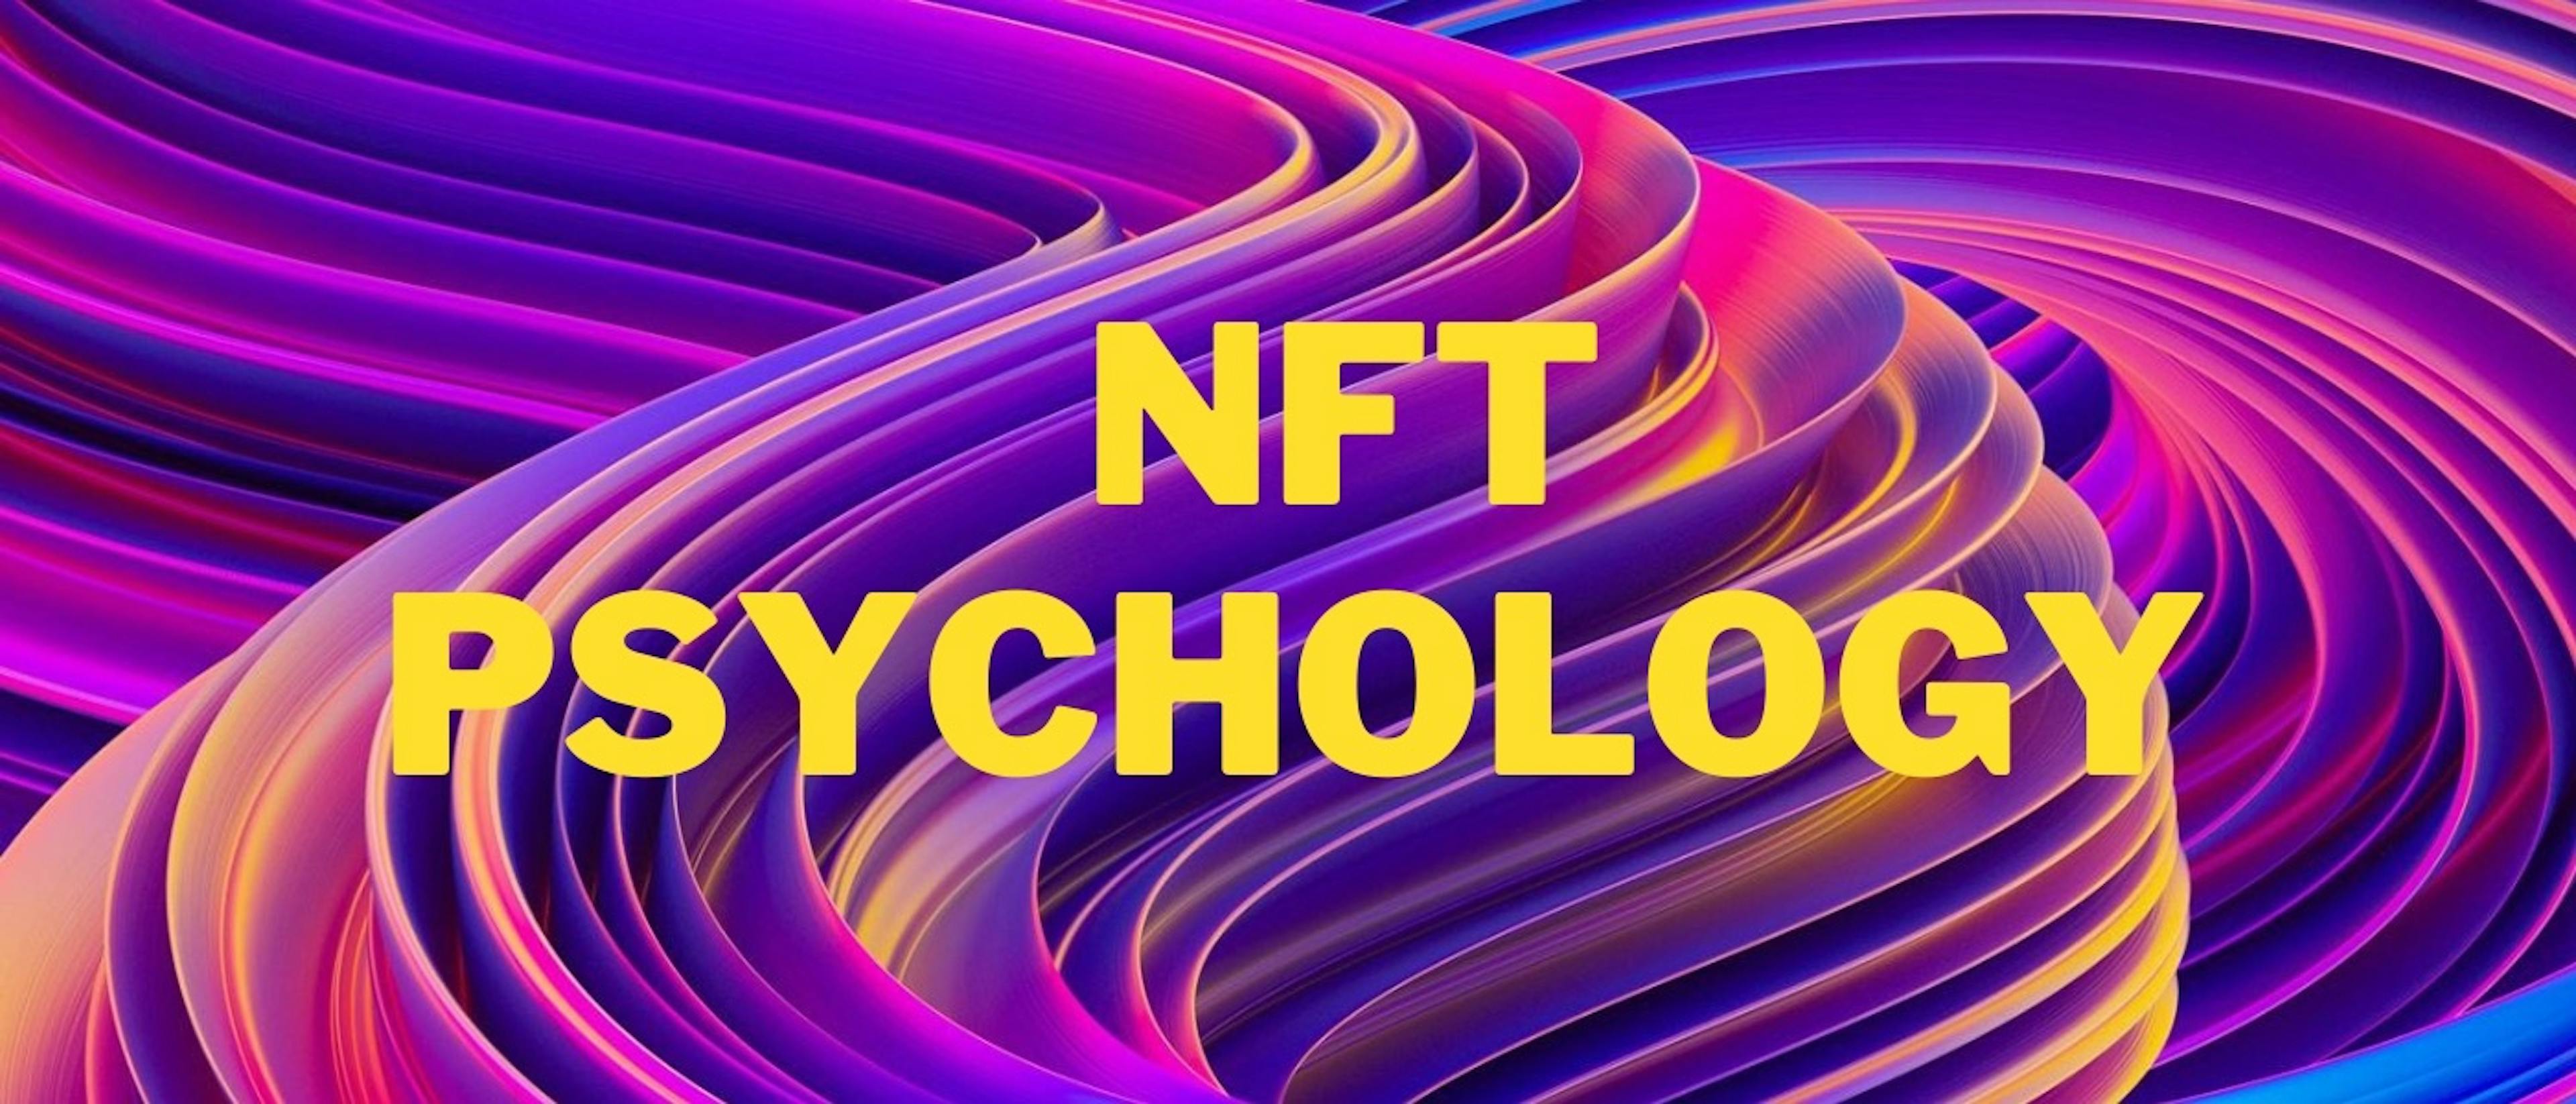 featured image - Cracking the NFT Code: The Psychology Behind Buying Digital Assets